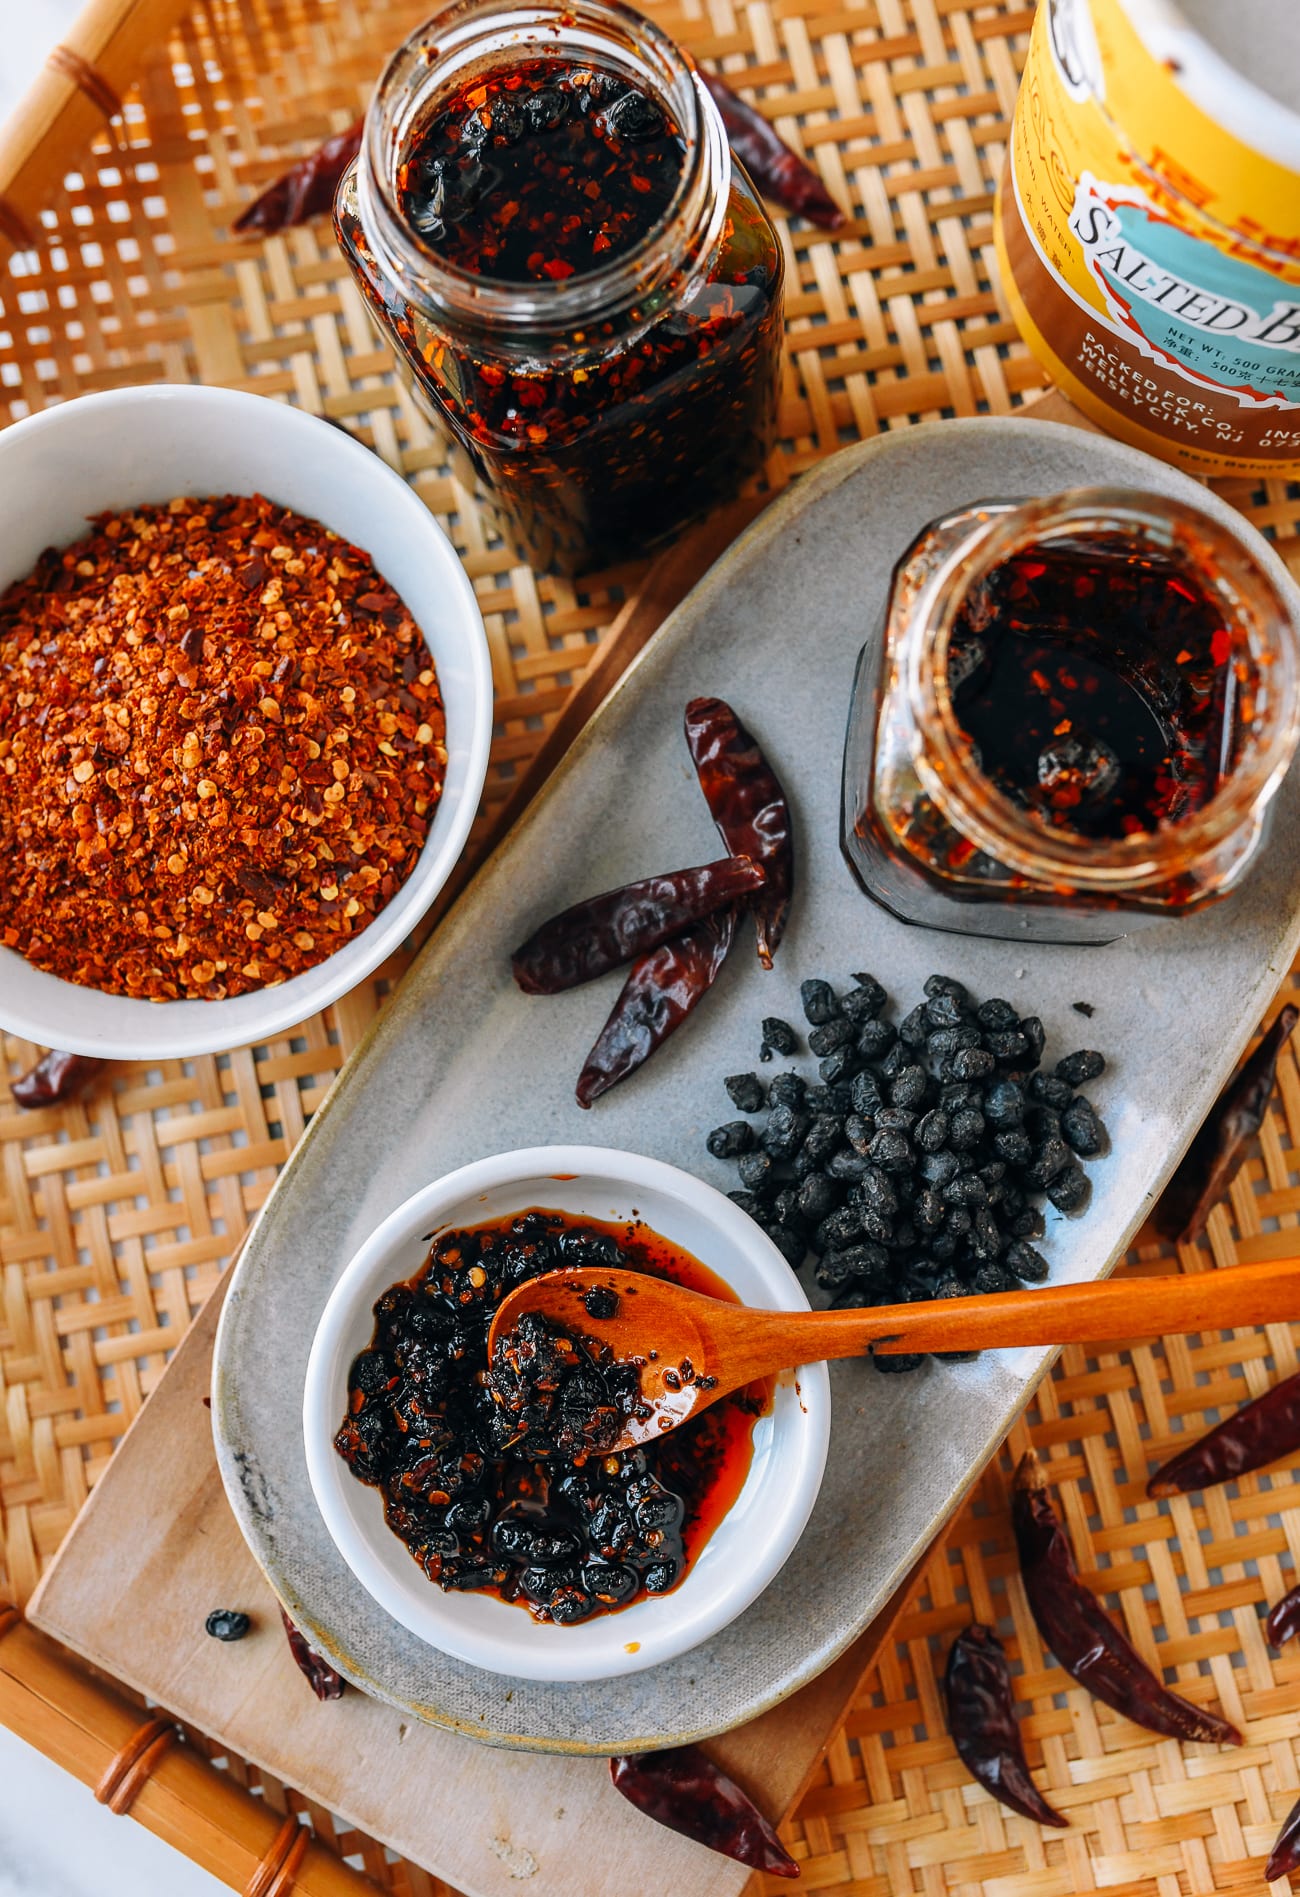 Chili Oil with Black Bean